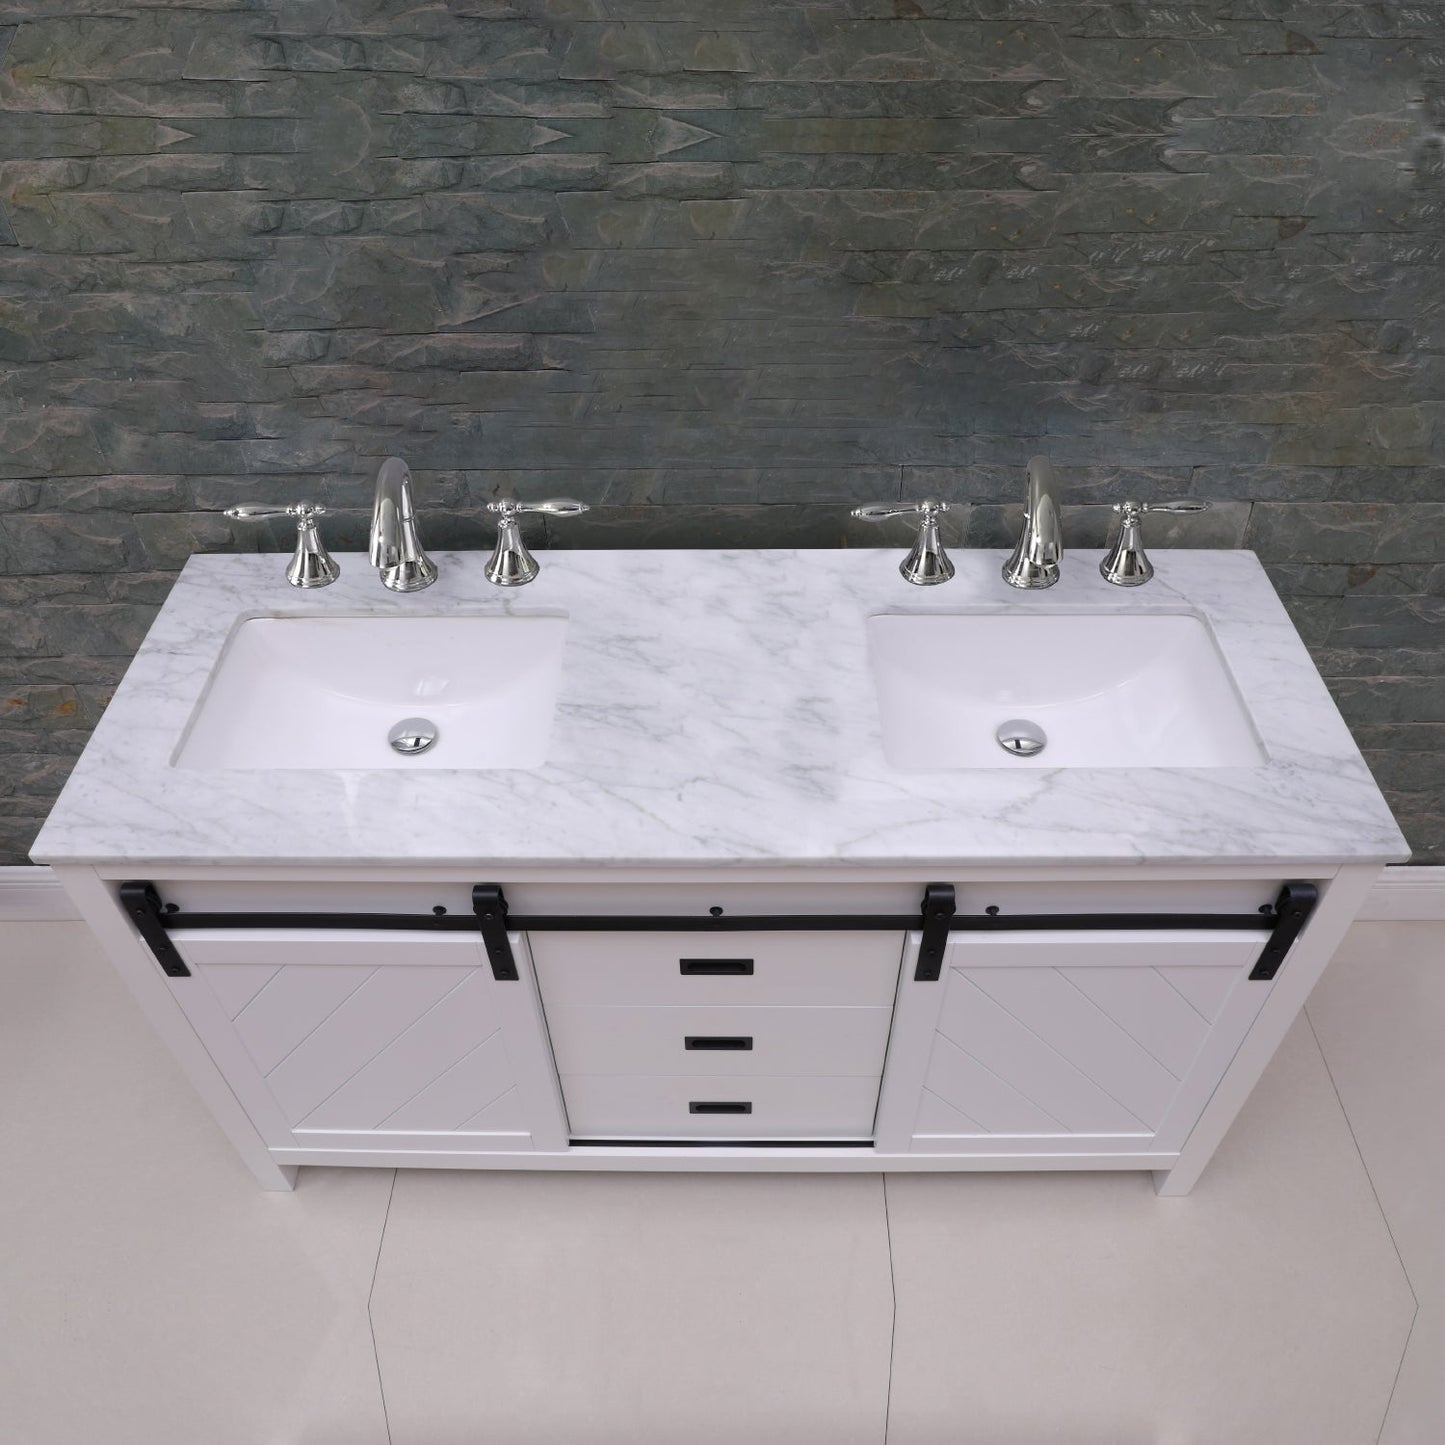 Kinsley 60" Double Bathroom Vanity Set in White and Carrara White Marble Countertop without Mirror